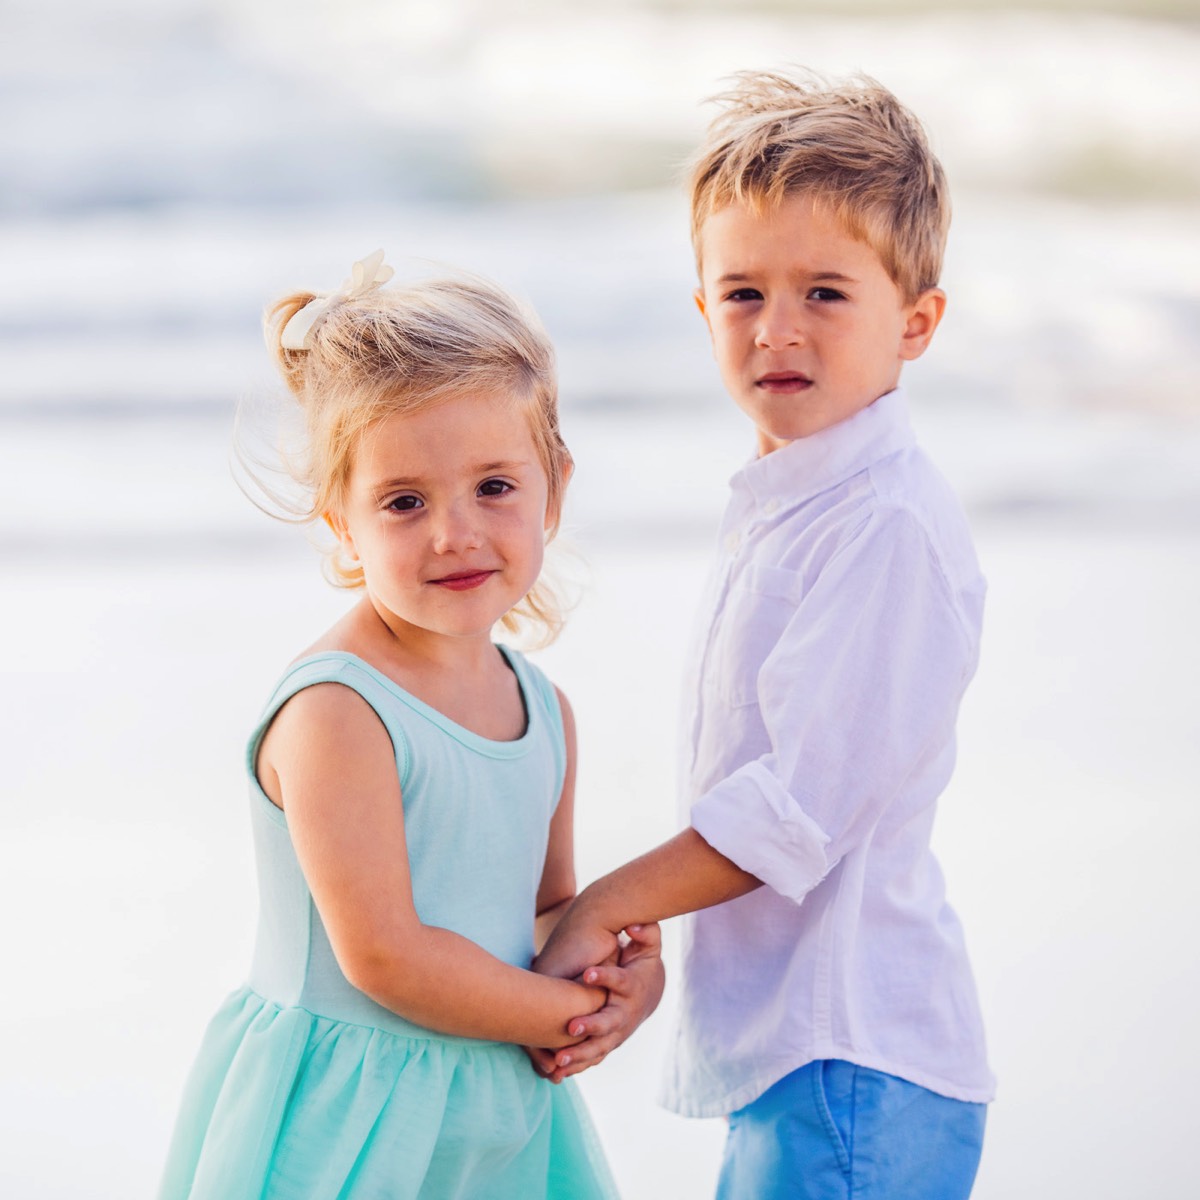 Brother and sister holding hands - Beach family portrait - family portraits - family picture - family photography - wilmington nc family photogrpahers - chris lang photography